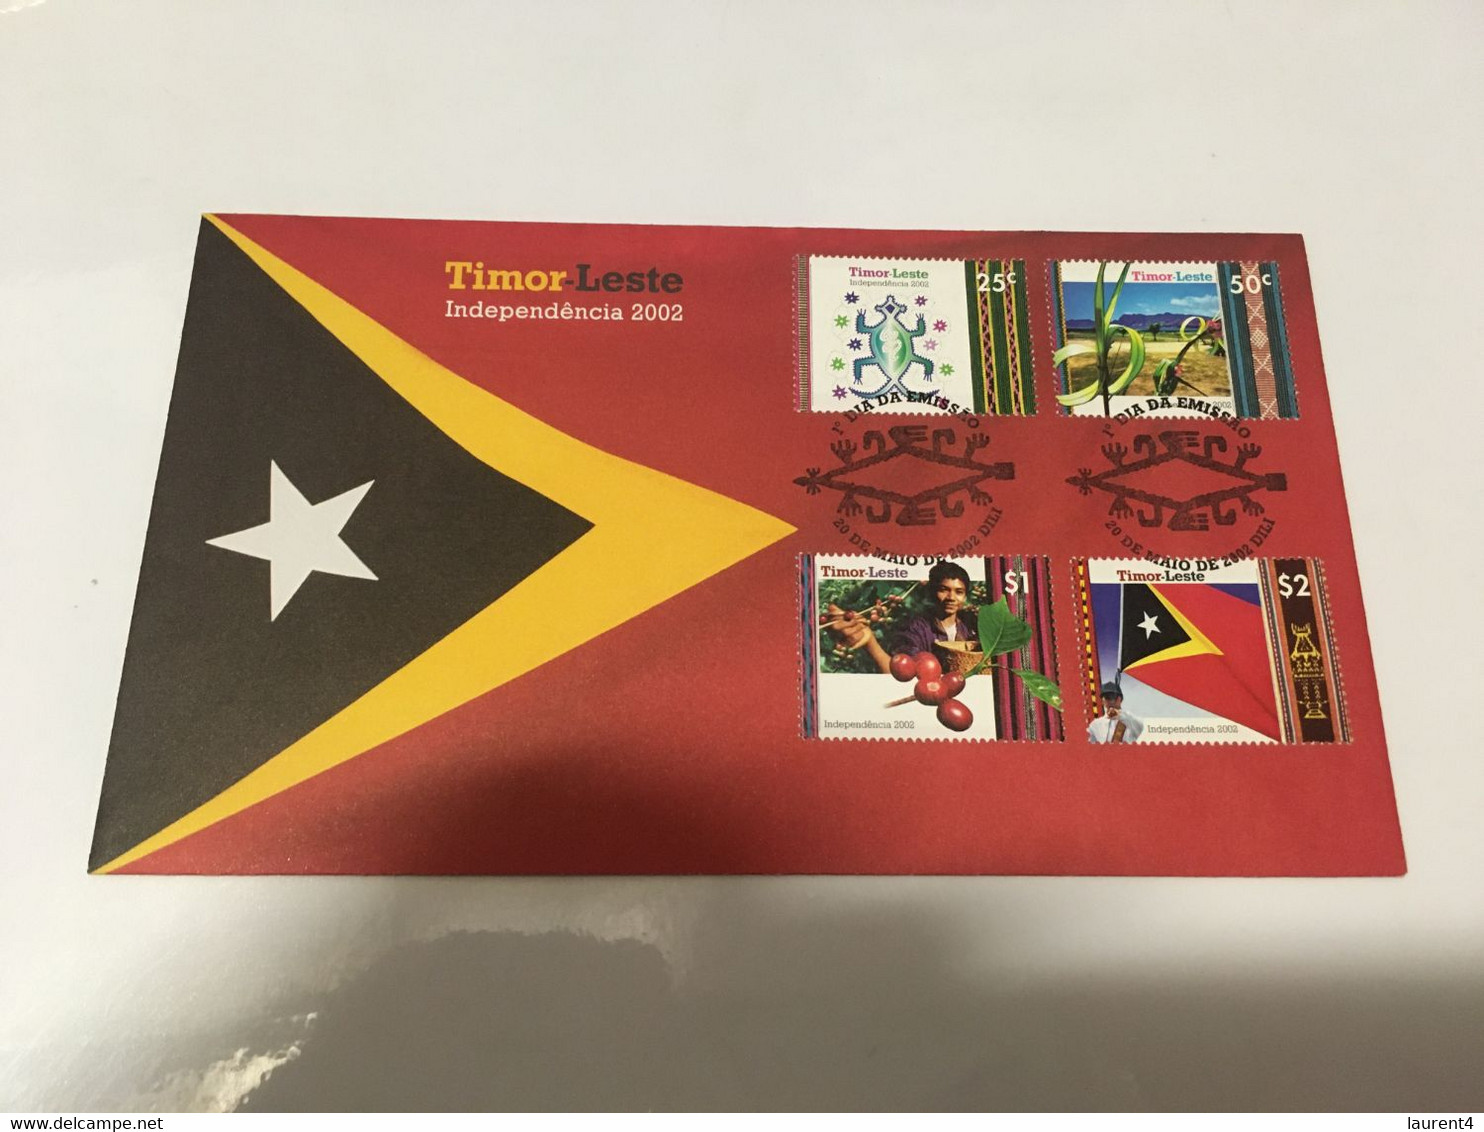 (1 G 48) Timr Leste Independence 2002 FDC (scarce) Cover - Issed By Australia Post - East Timor